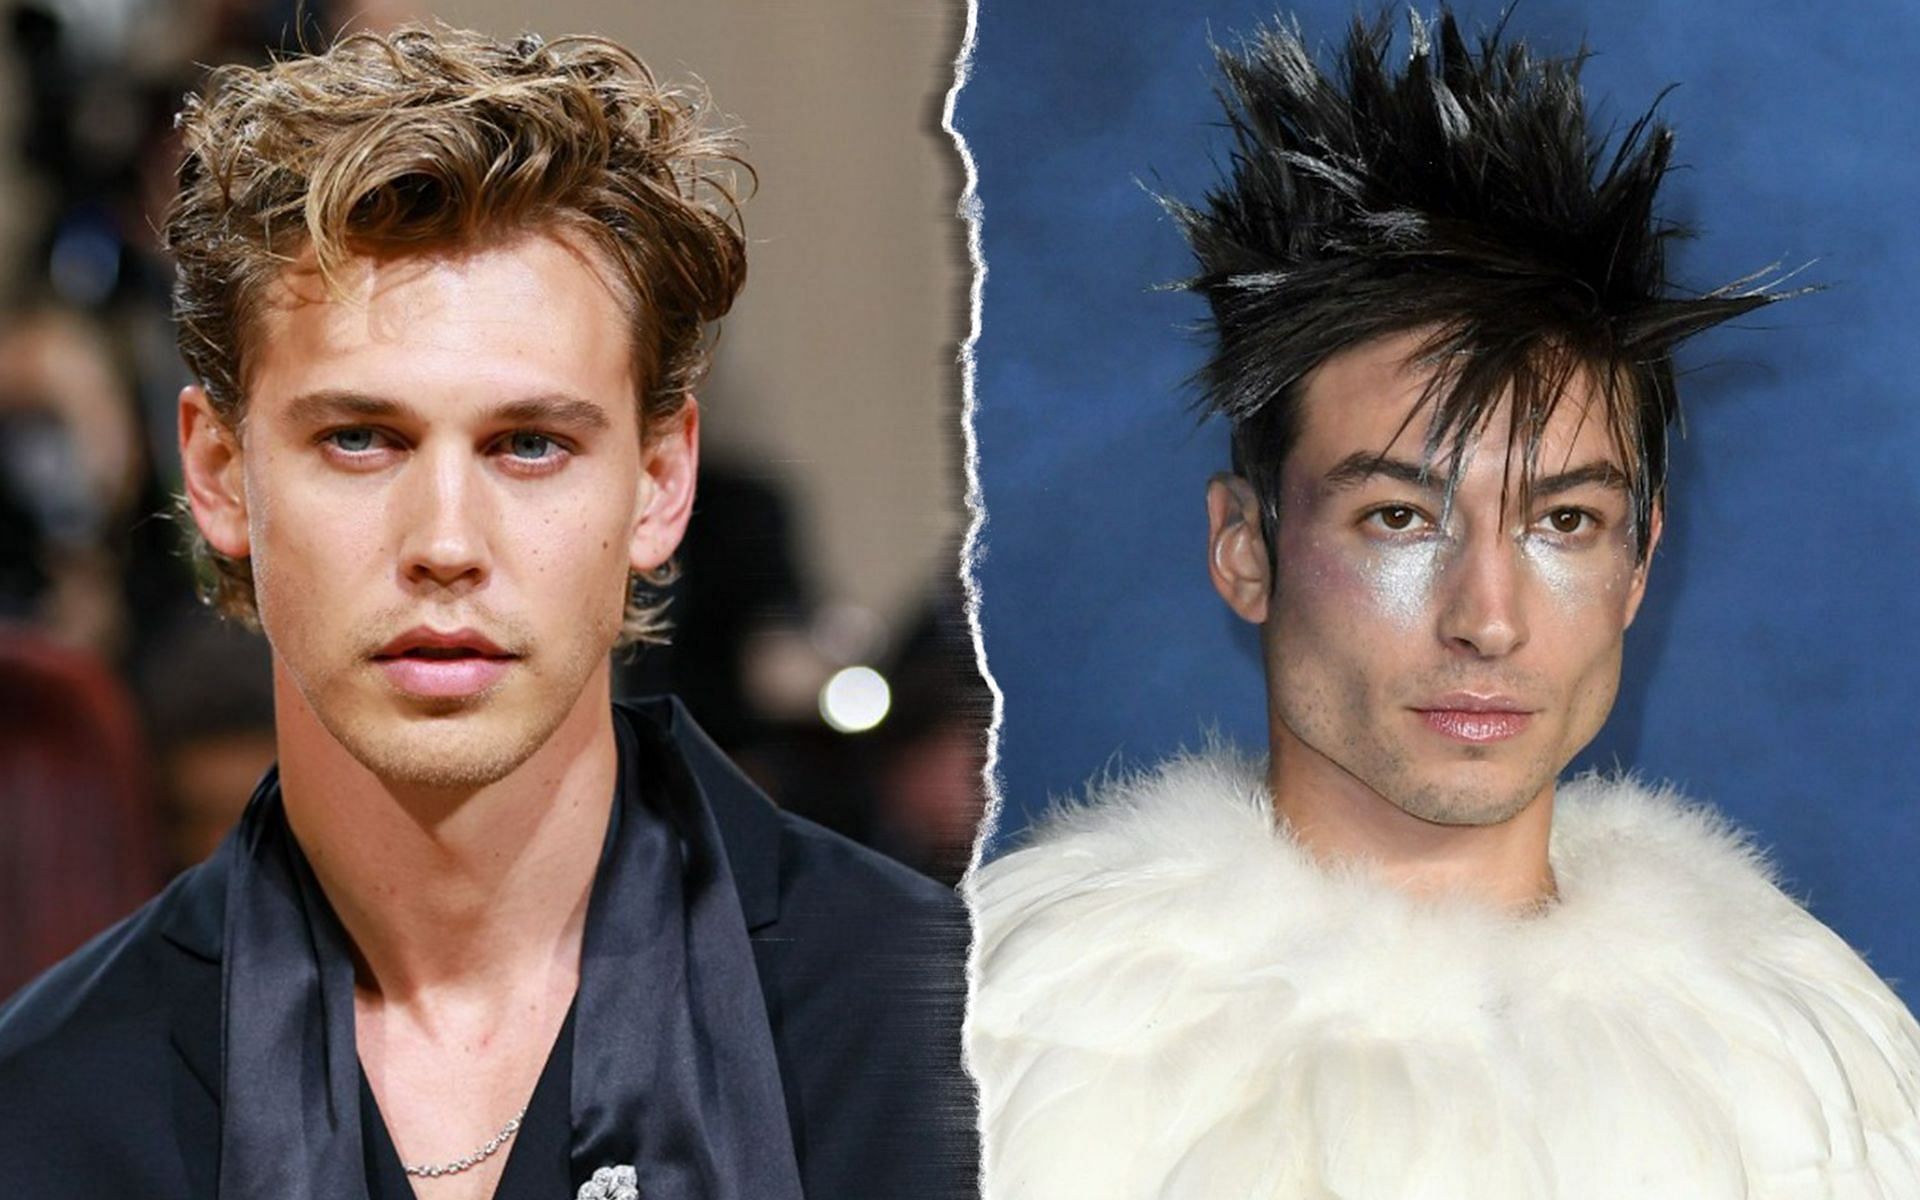 Rumors of Ezra Miller and Austin Butler getting into a fight in Japan debunked (Image via Getty Images)